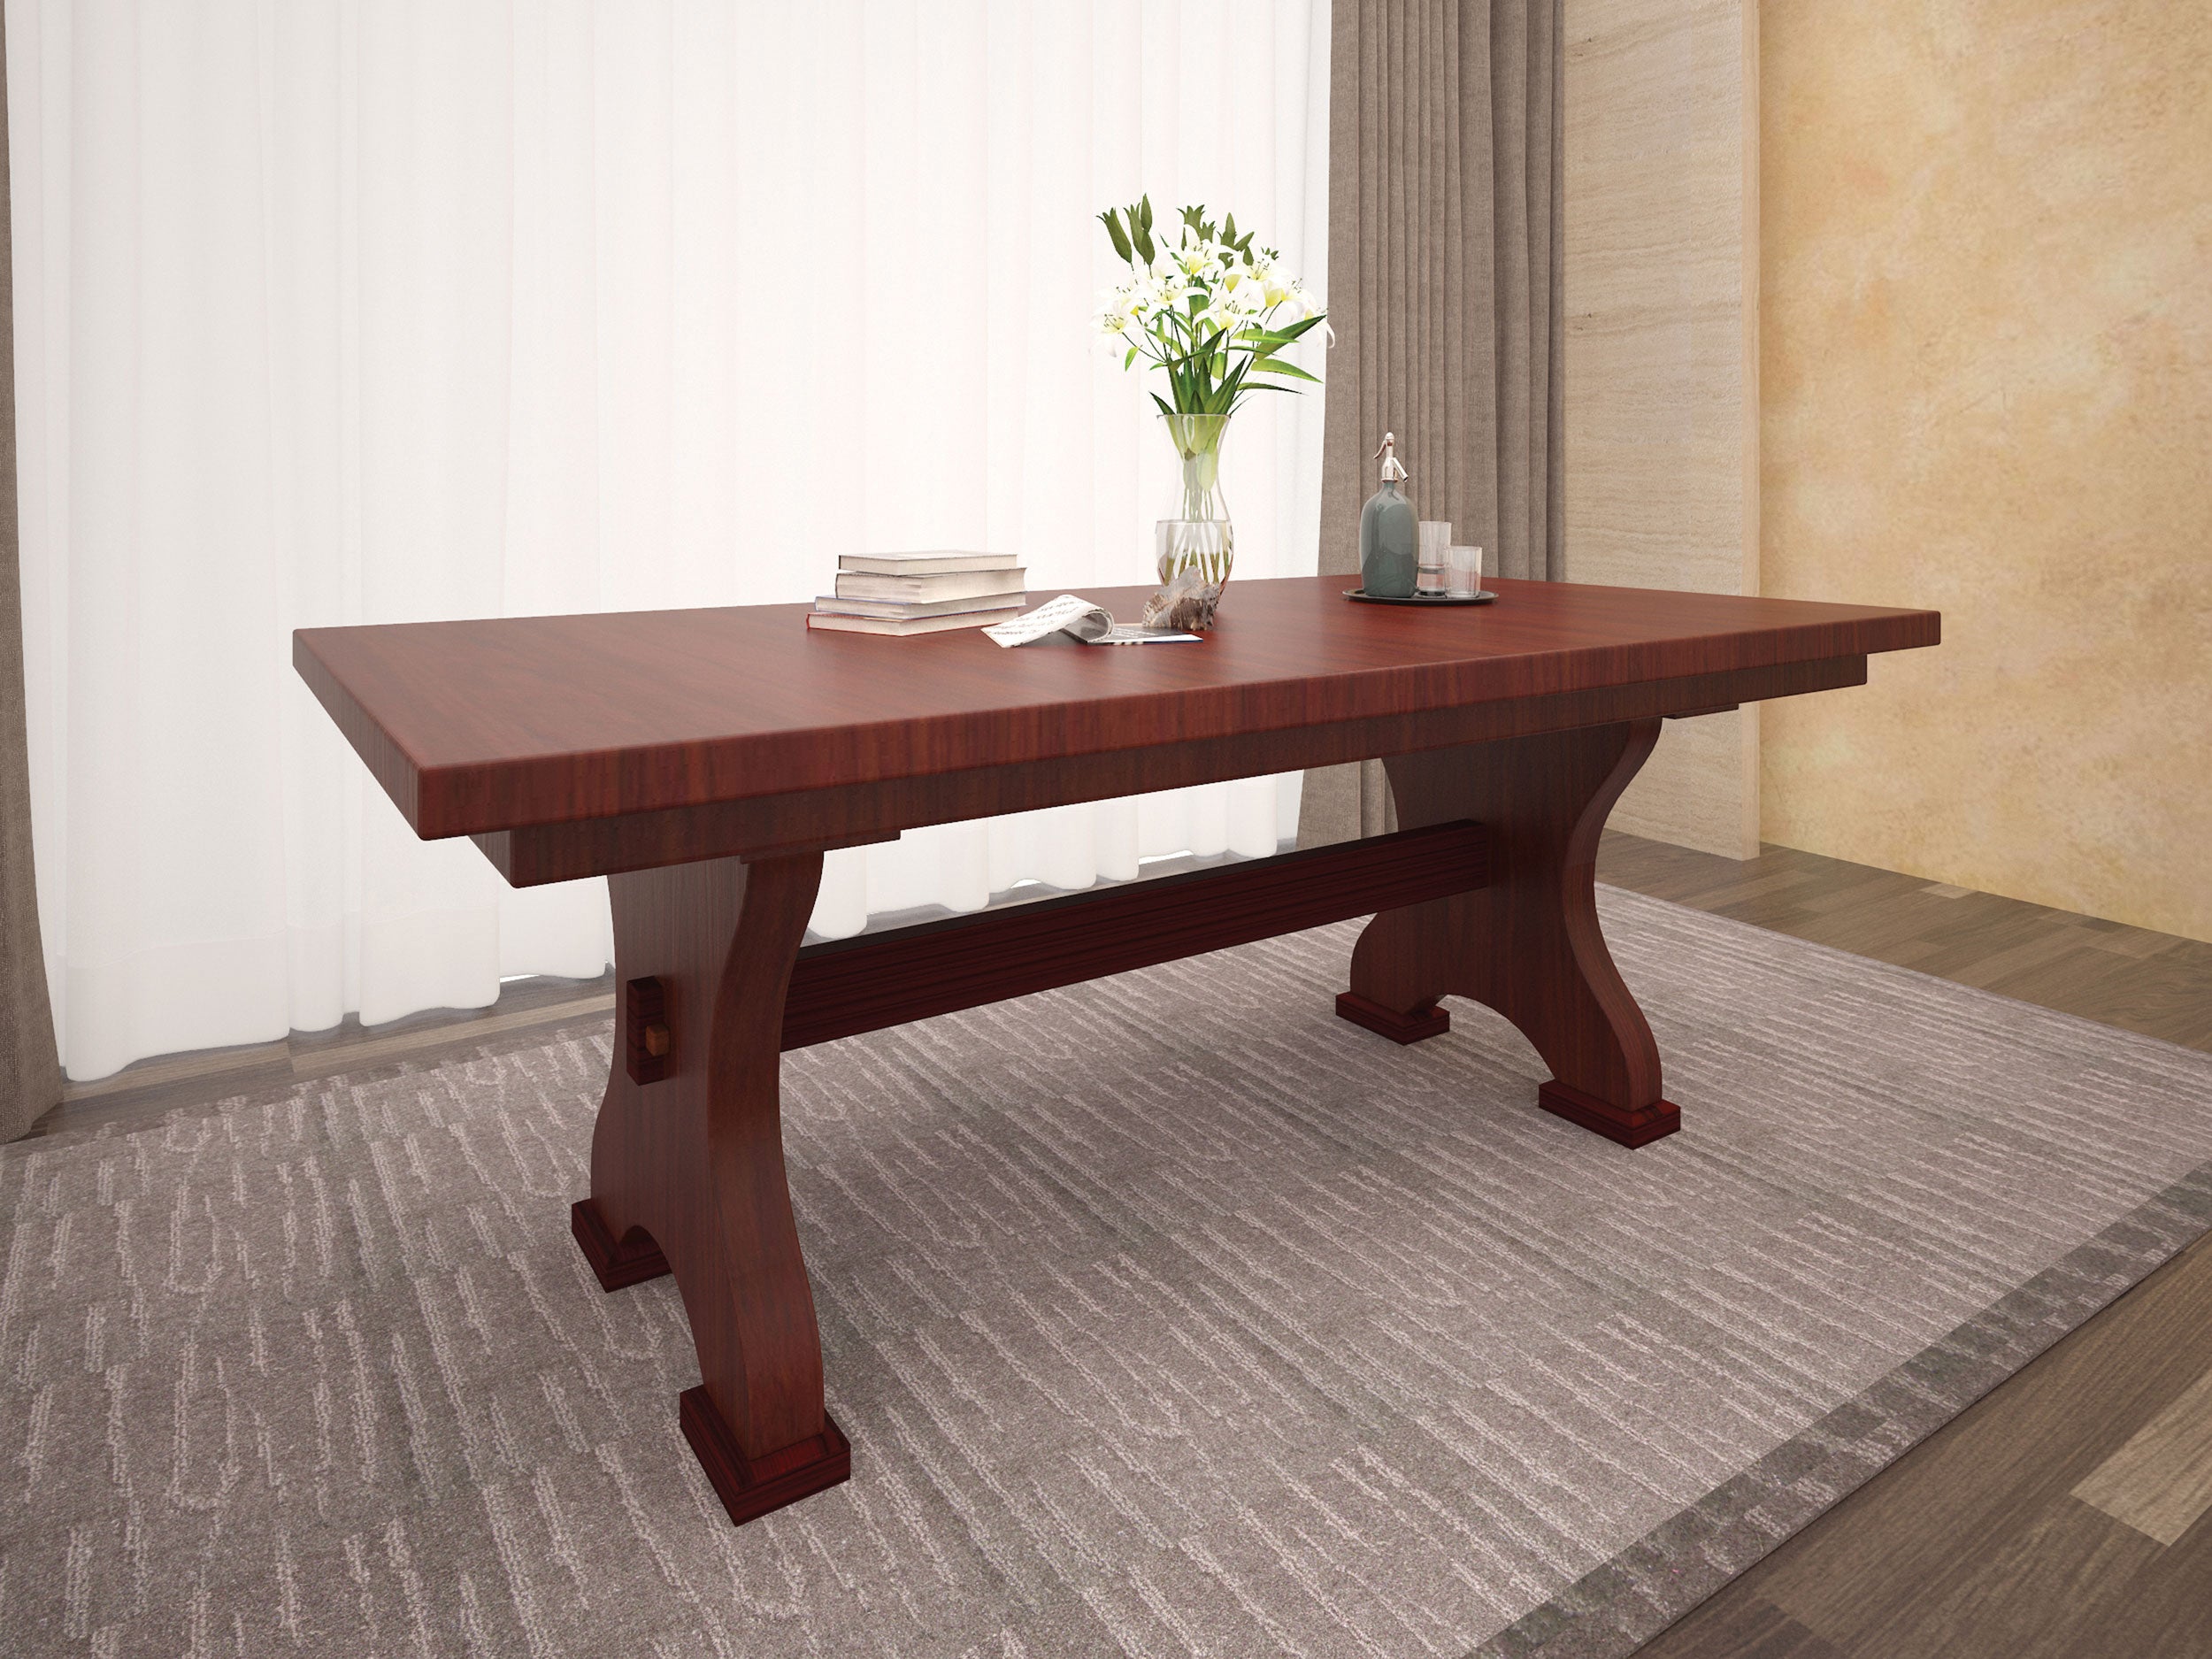 Amish Farmers Double Pedestal Table